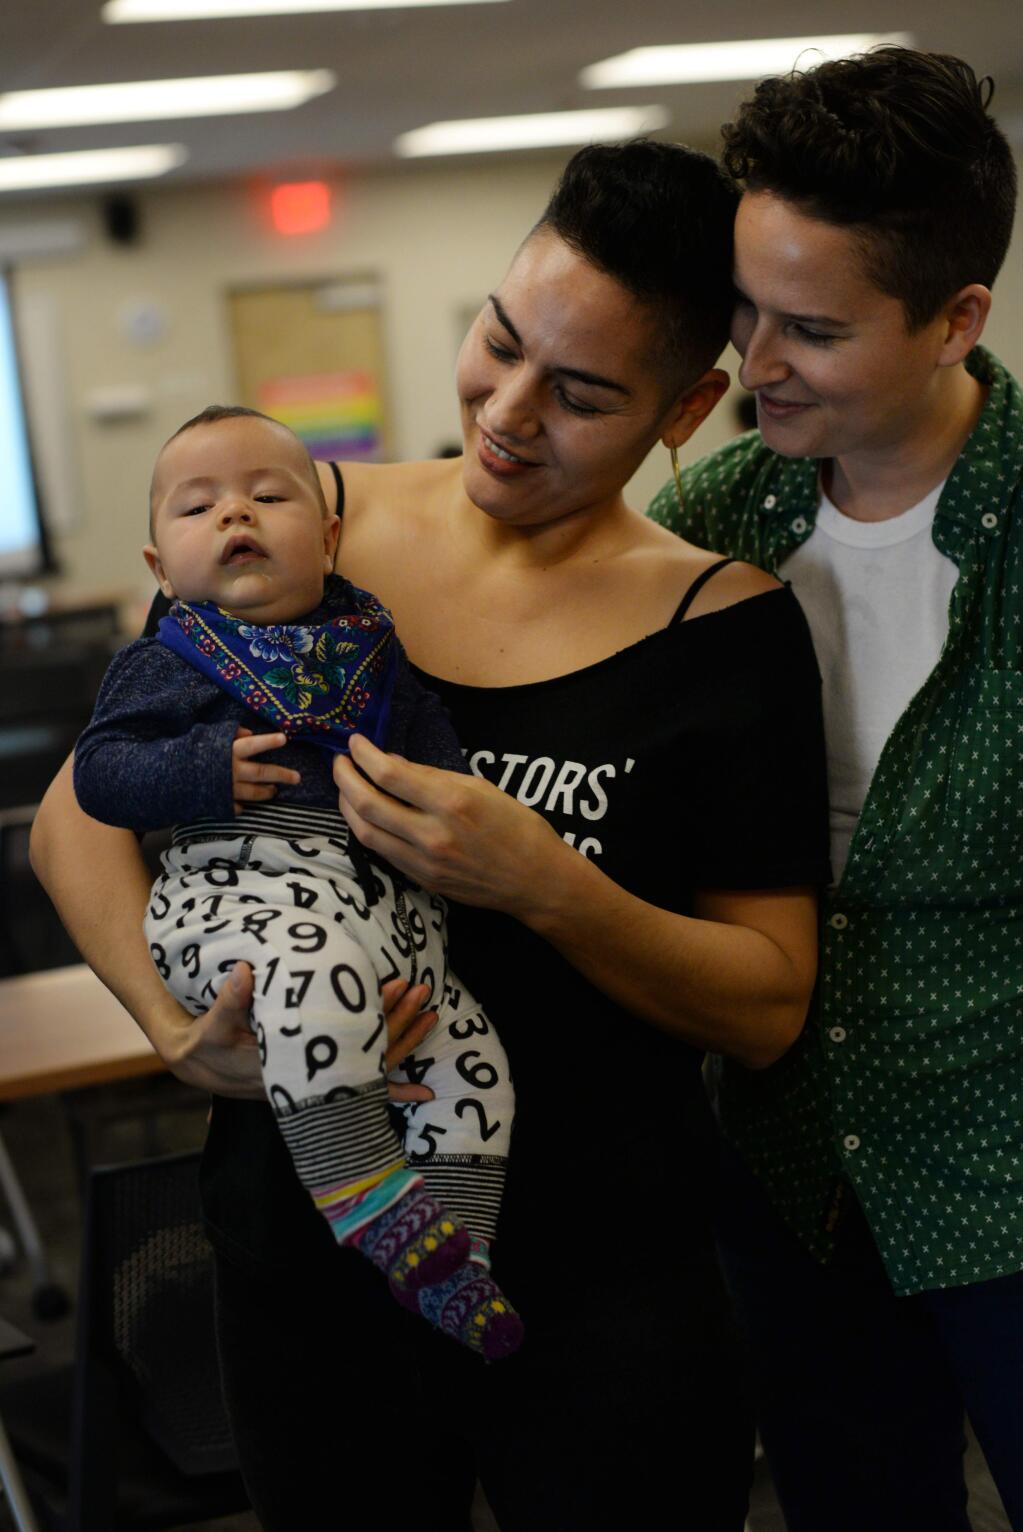 Andrea Ruizquez and her partner Marea Goodman, right, holding their 4-month-old son Feliciano Ruizquez came up from Oakland, Californian to attend the 2nd Annual LGBTQI Family Formation Symposium held Sunday at Social Advocates for Youth Dream Center in Santa Rosa, California. 'We're here just to be around other queer families,' said Ruizquez, January 28, 2018.(Photo: Erik Castro/for The Press Democrat)